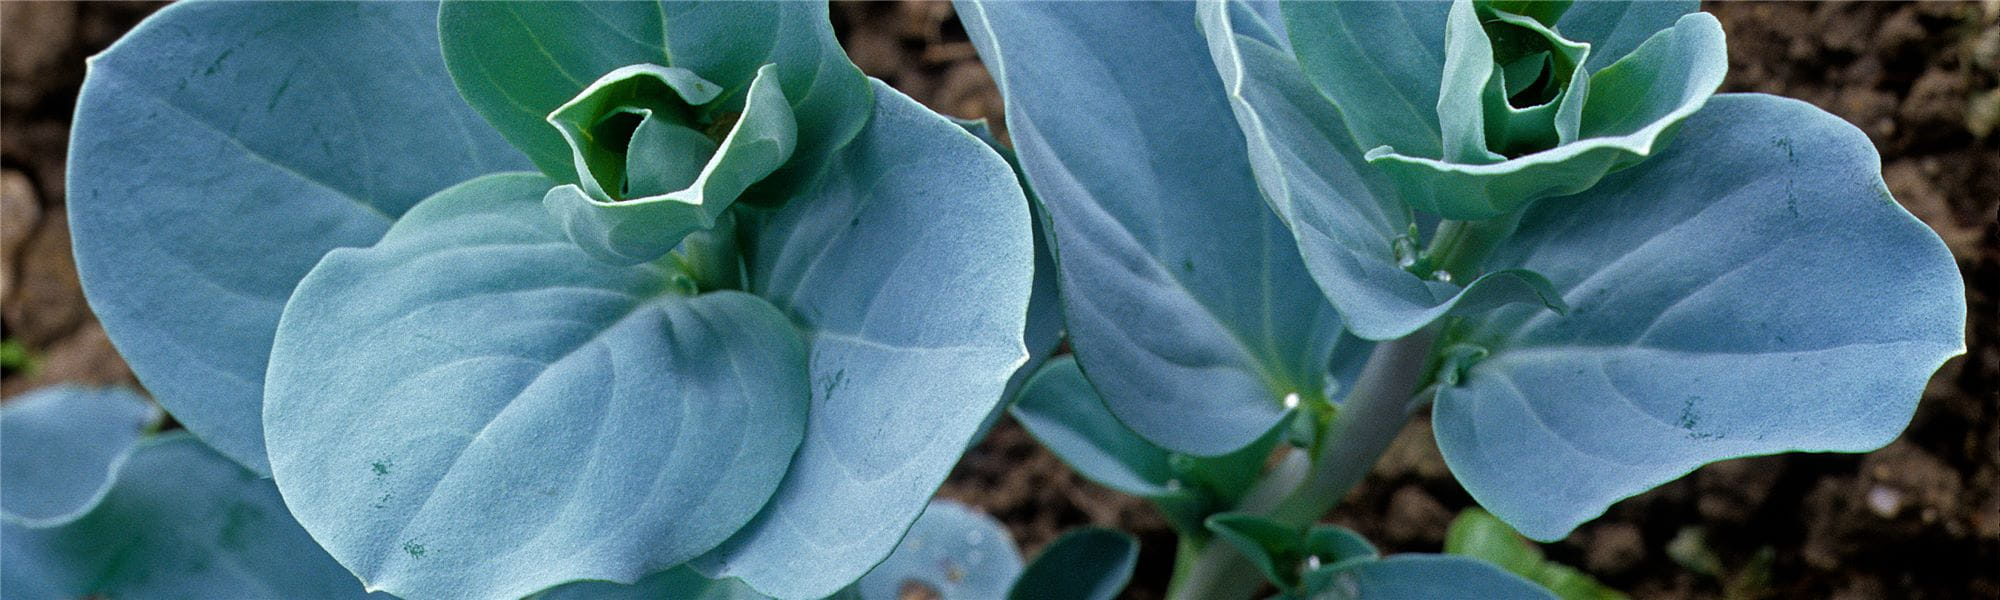 Oyster Plant